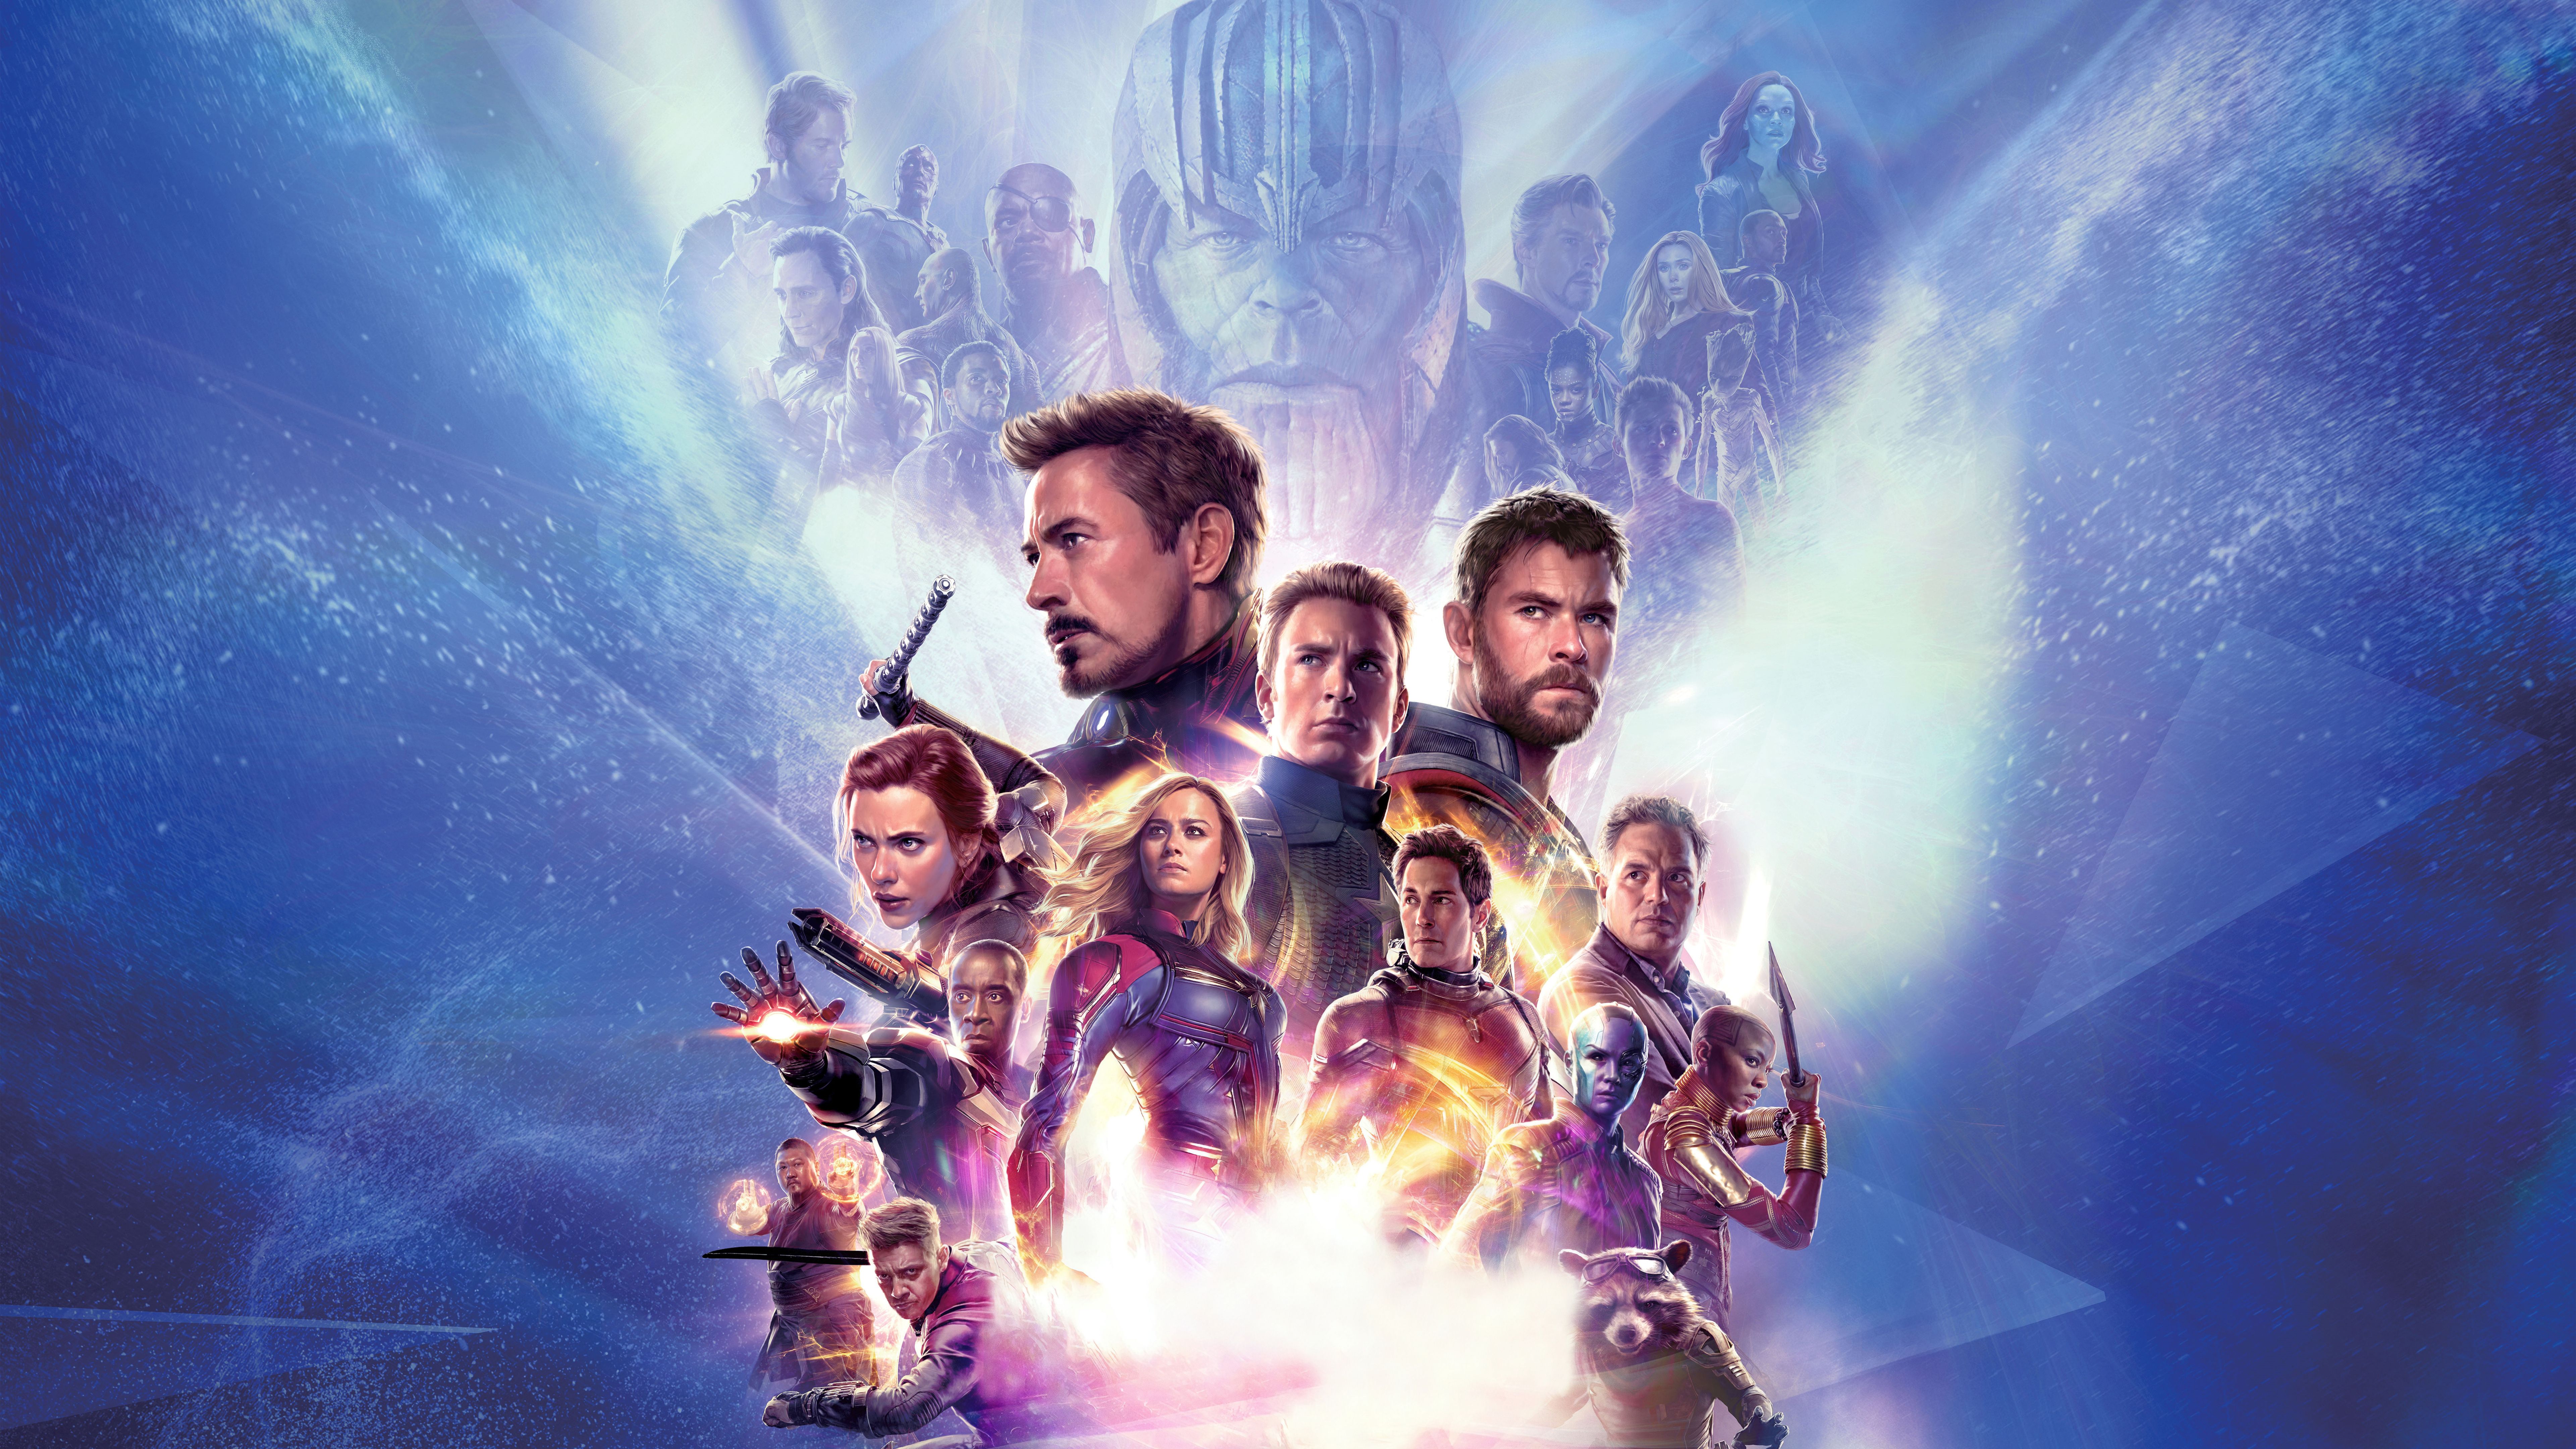 Avengers Endgame 2019 8k 8k HD 4k Wallpaper, Image, Background, Photo and Picture